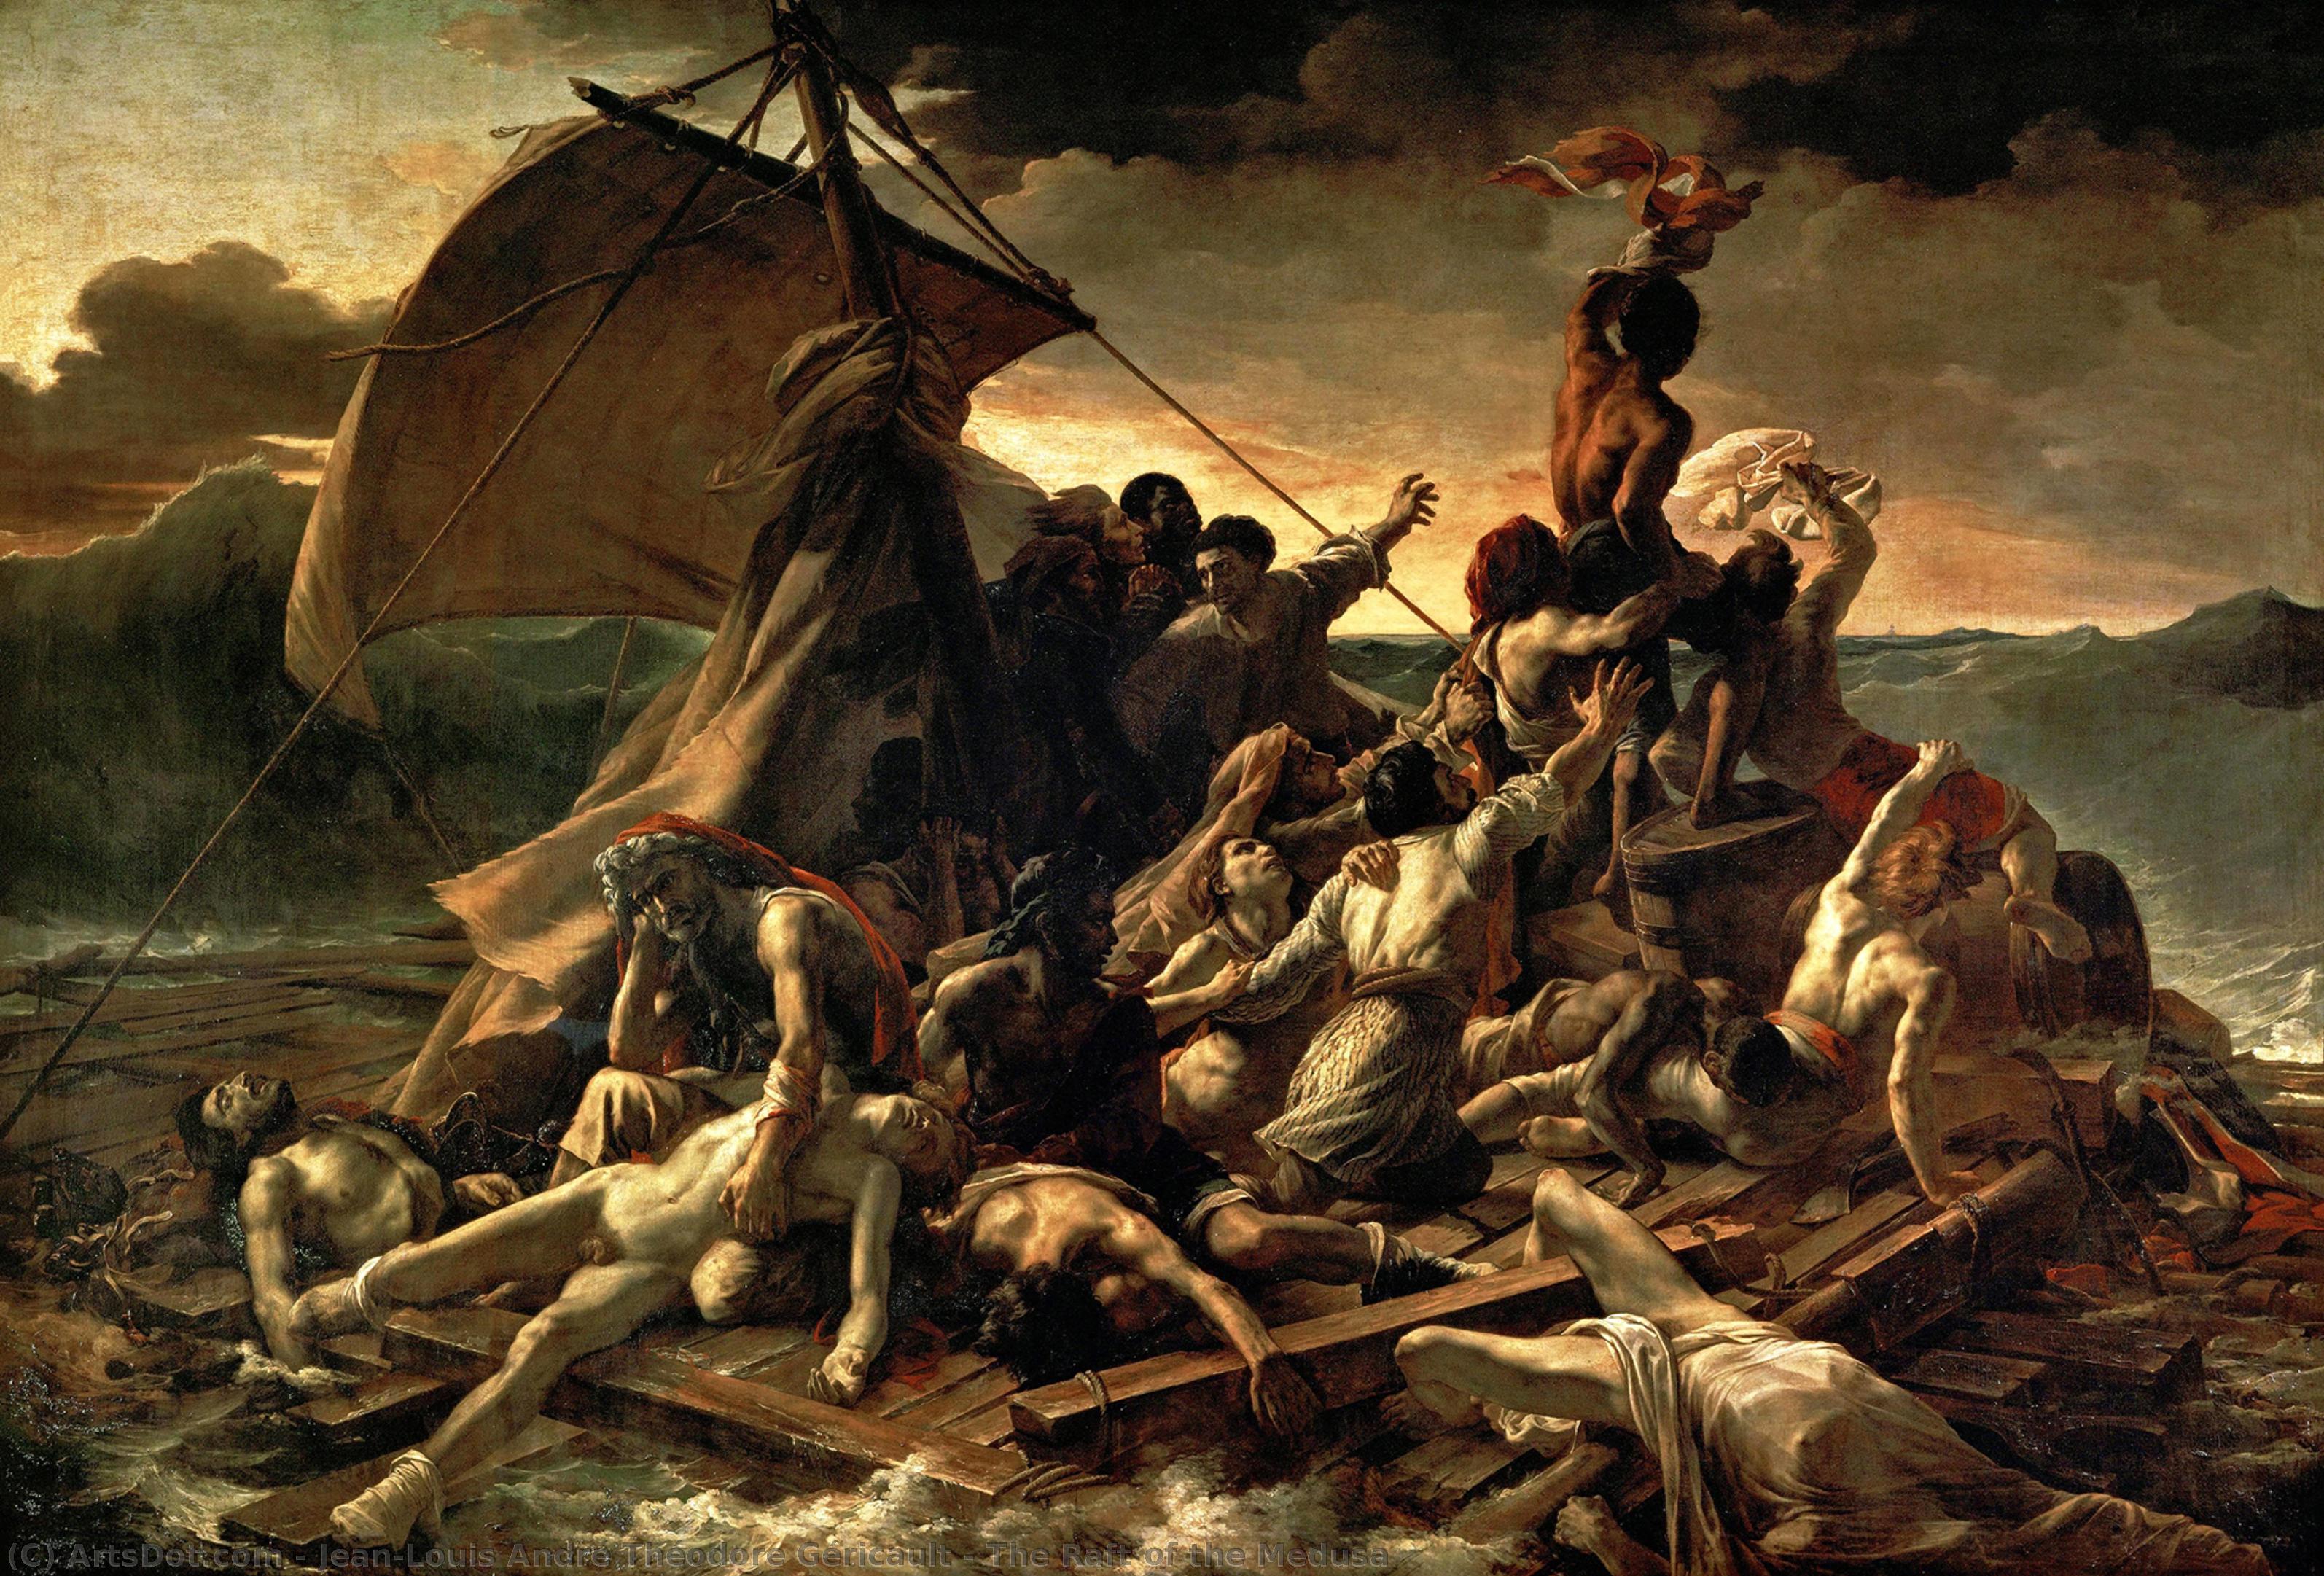 WikiOO.org - 百科事典 - 絵画、アートワーク Jean-Louis André Théodore Géricault - メドゥーサのいかだ